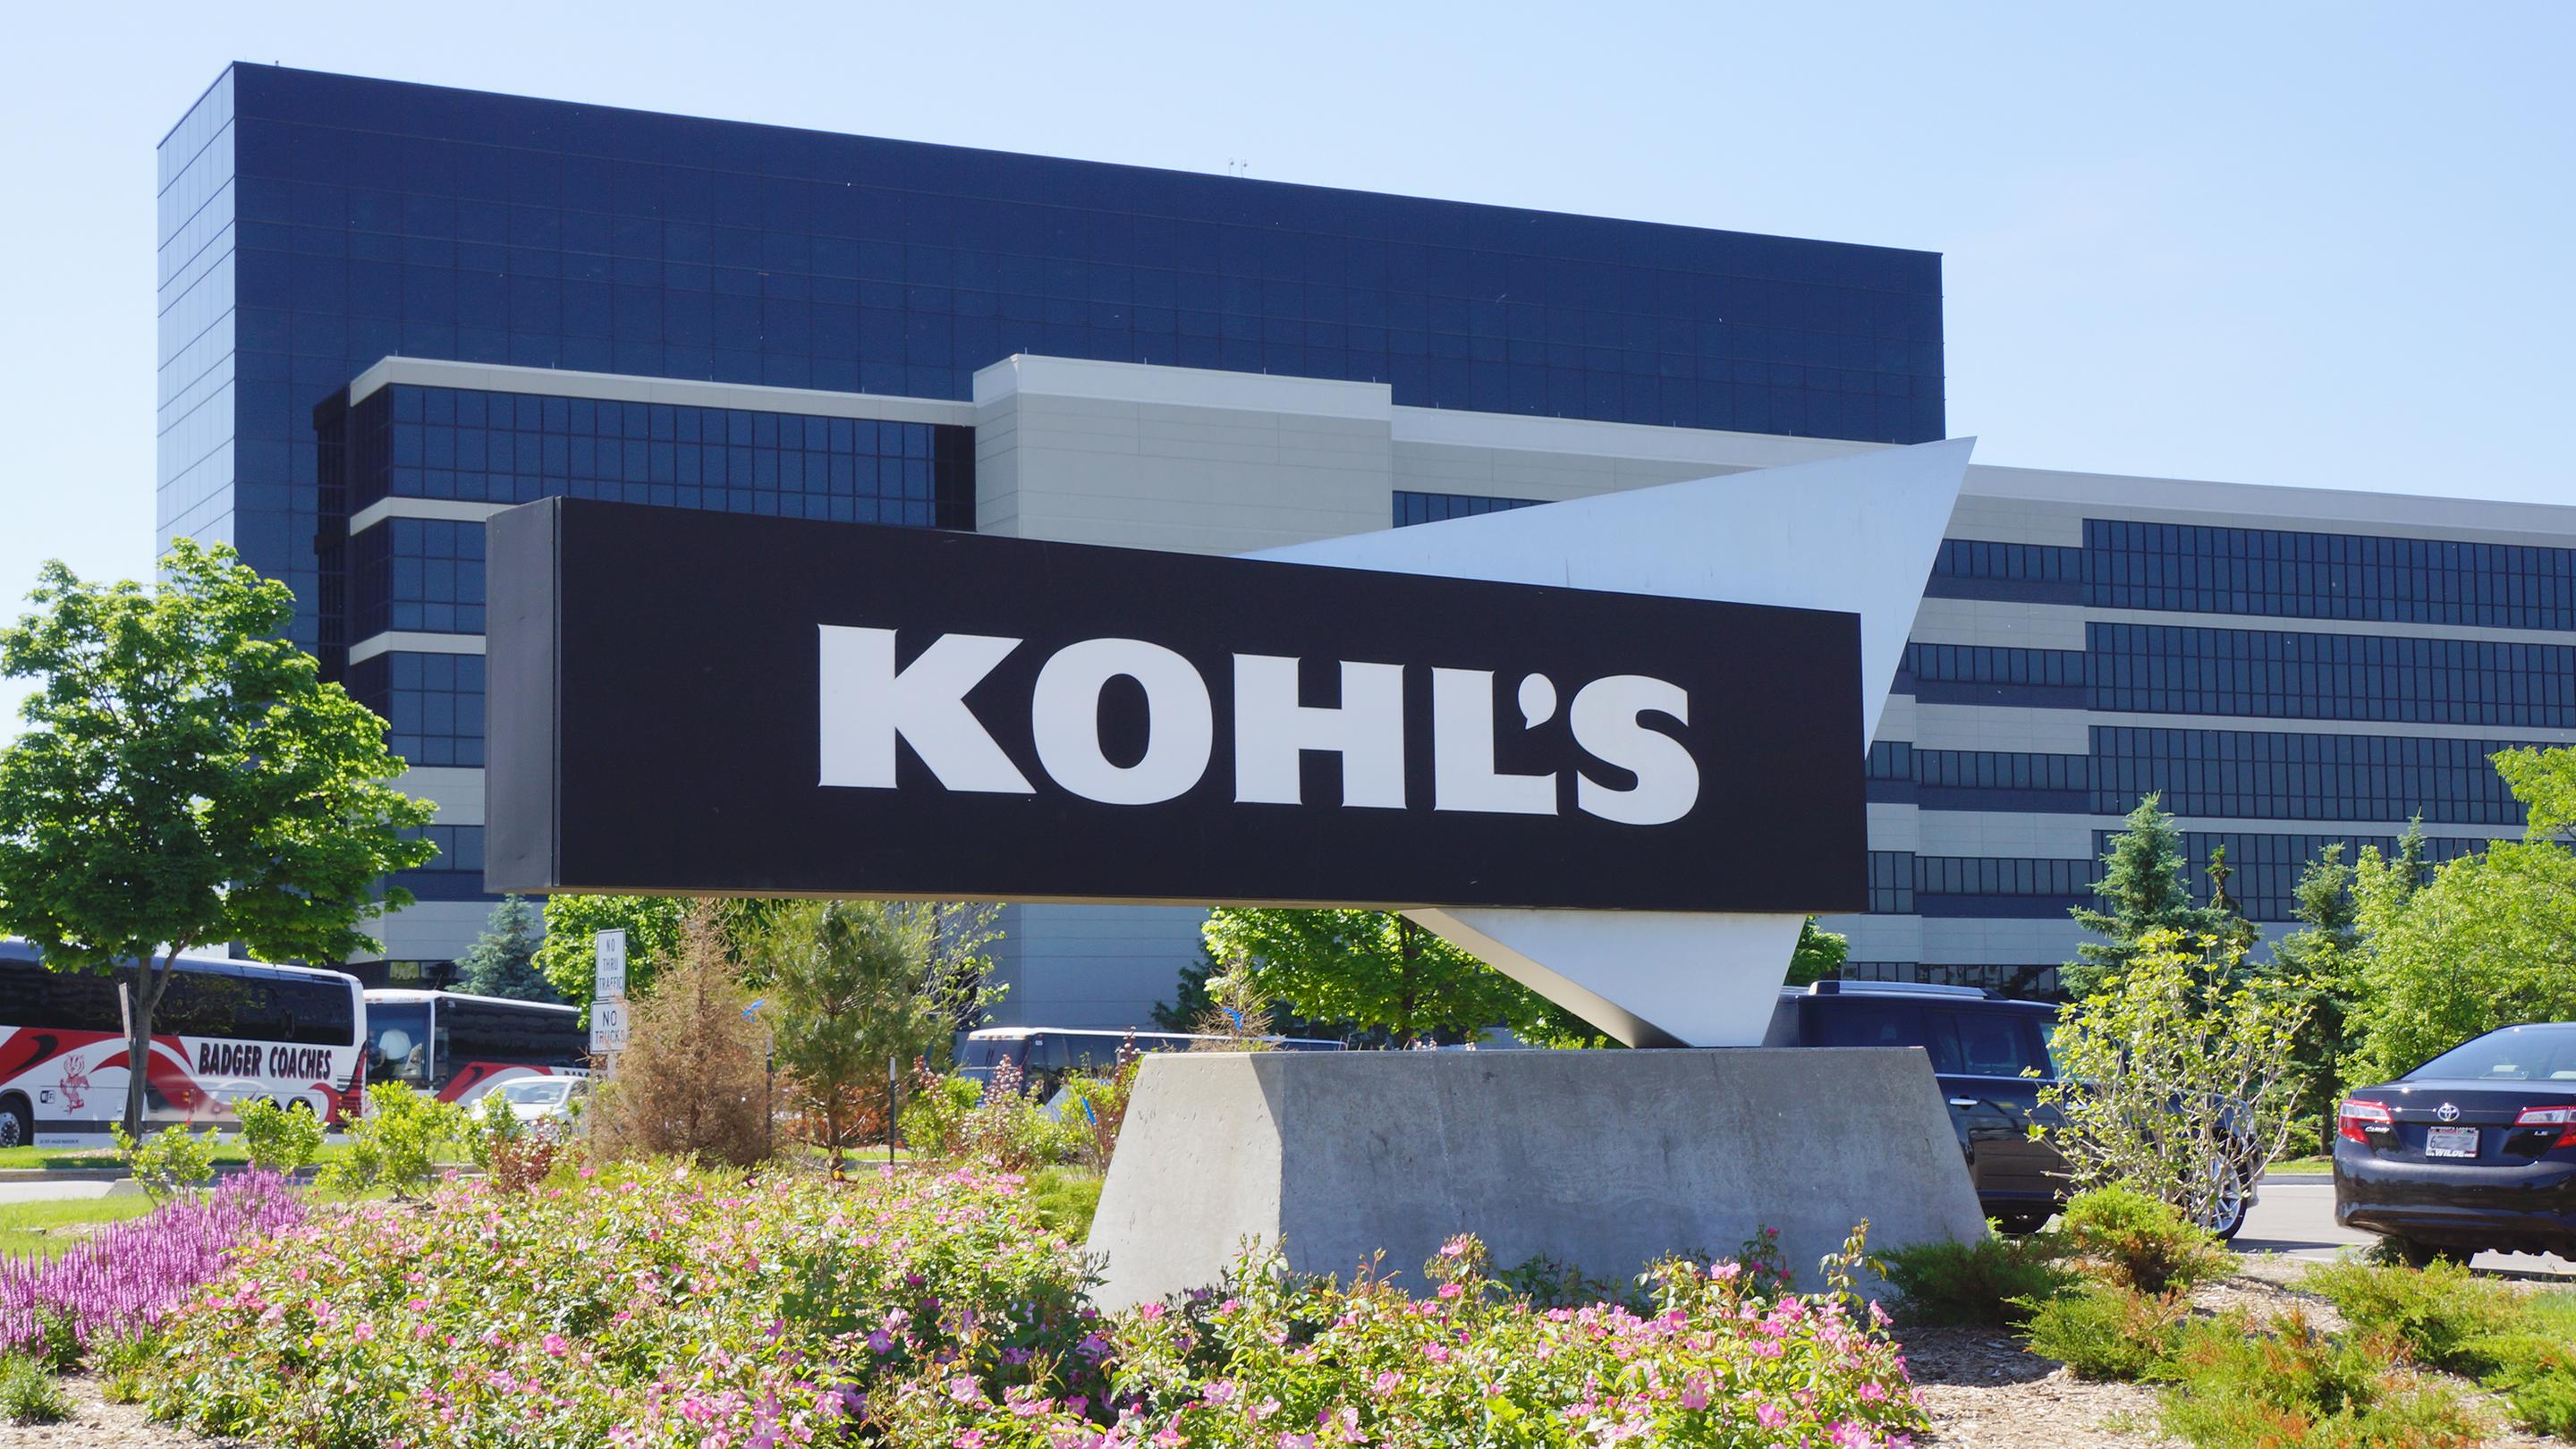 Kohl's Puts Its Media Account Up for Review